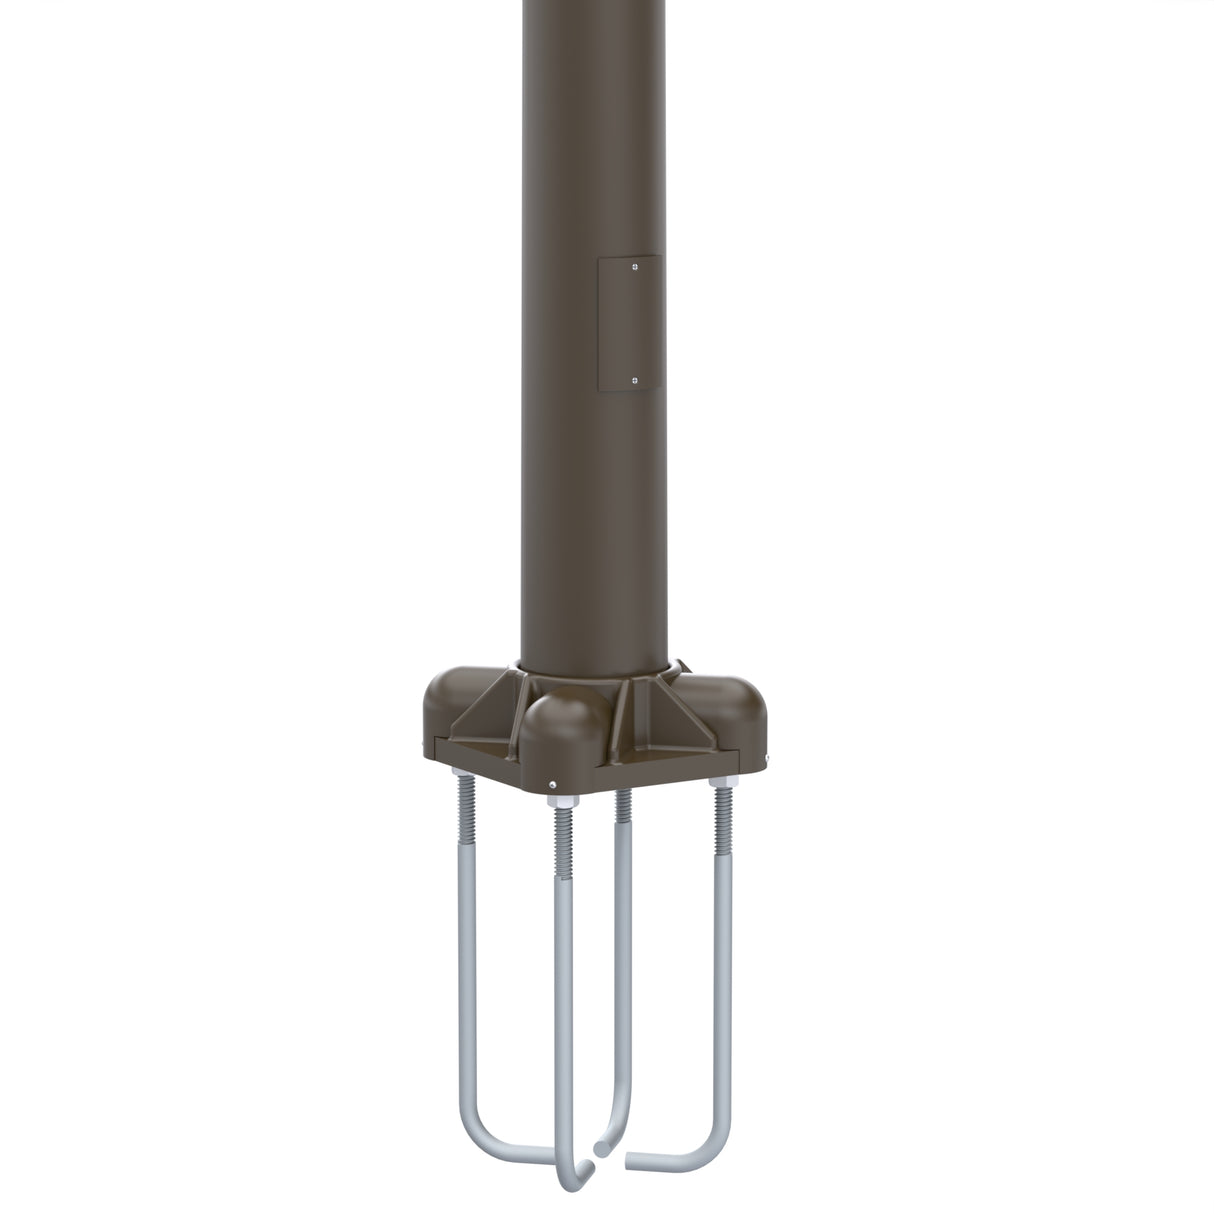 35' Tall x 8.0" Base OD x 4.5" Top OD x 0.156" Thick, Round Tapered Aluminum, Anchor Base Light Pole